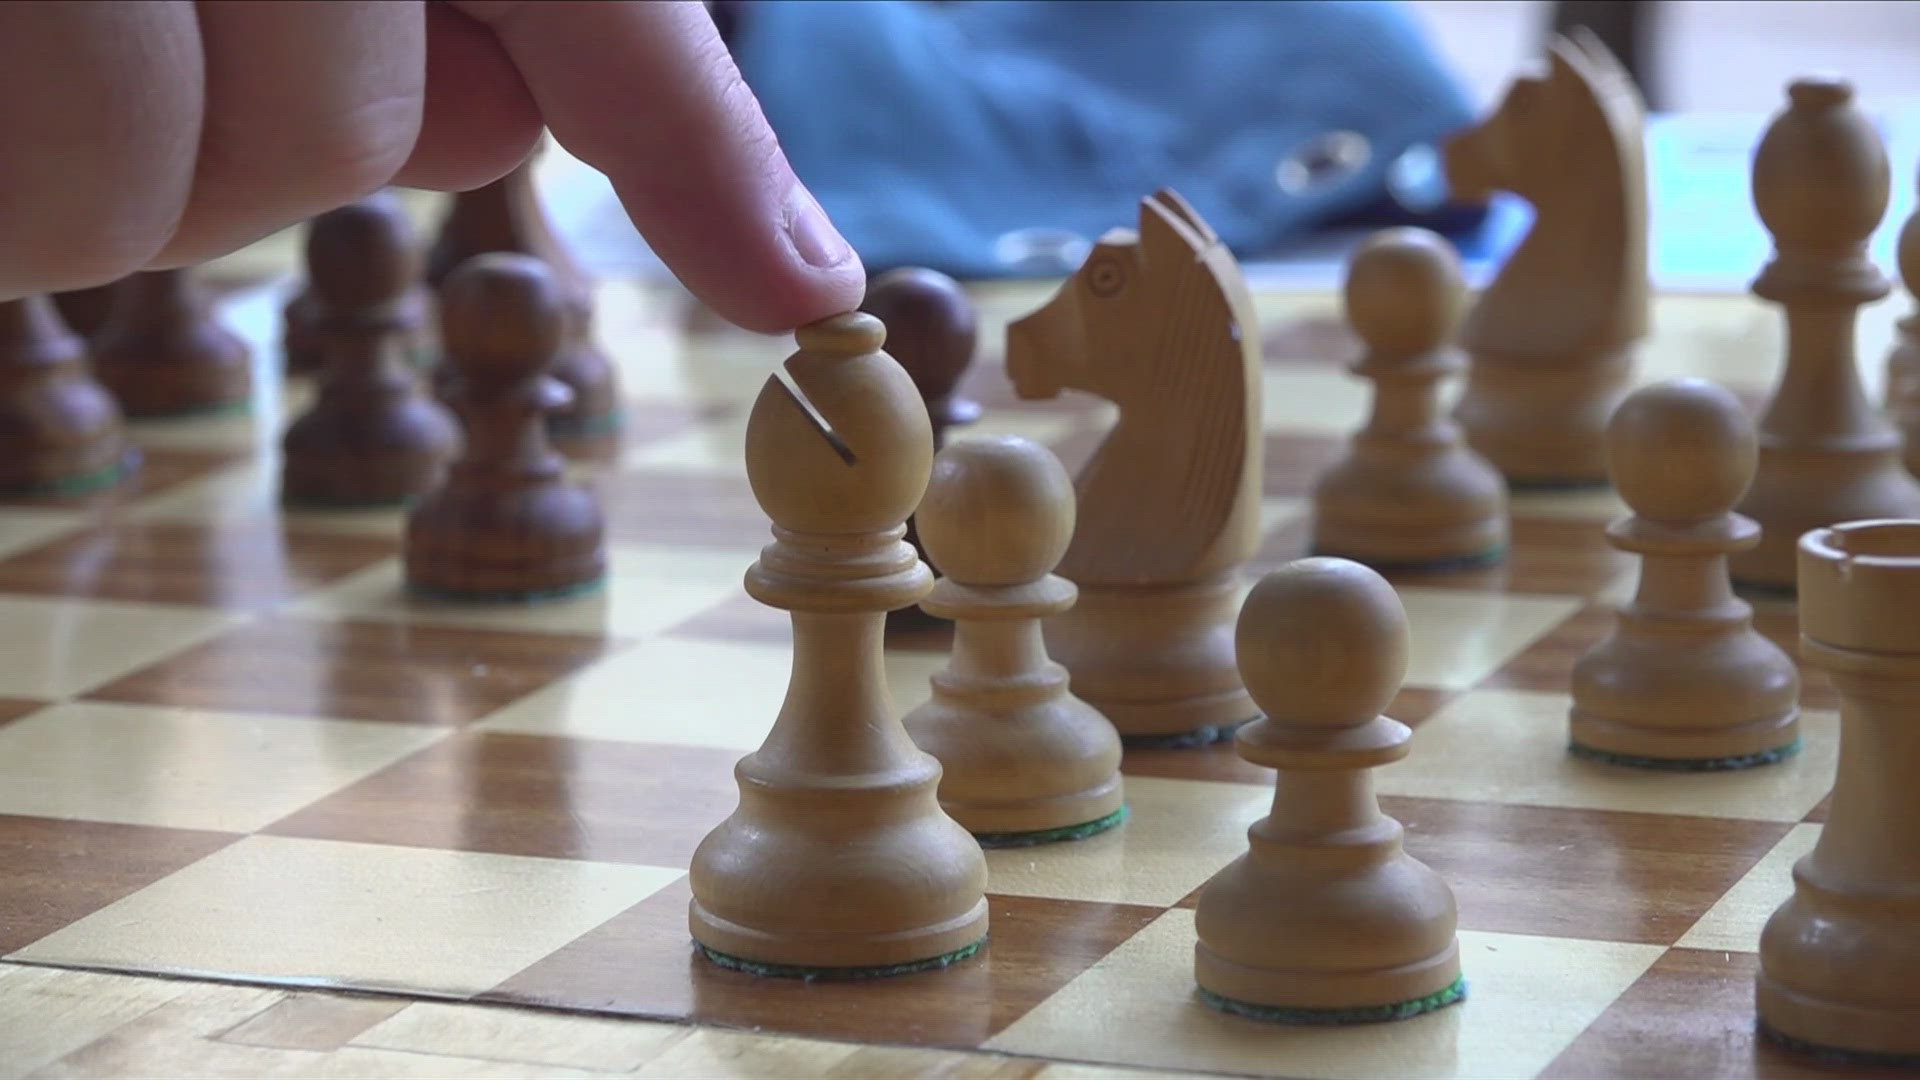 When it comes to chess, a group of Memphis kids are making waves at the state level.